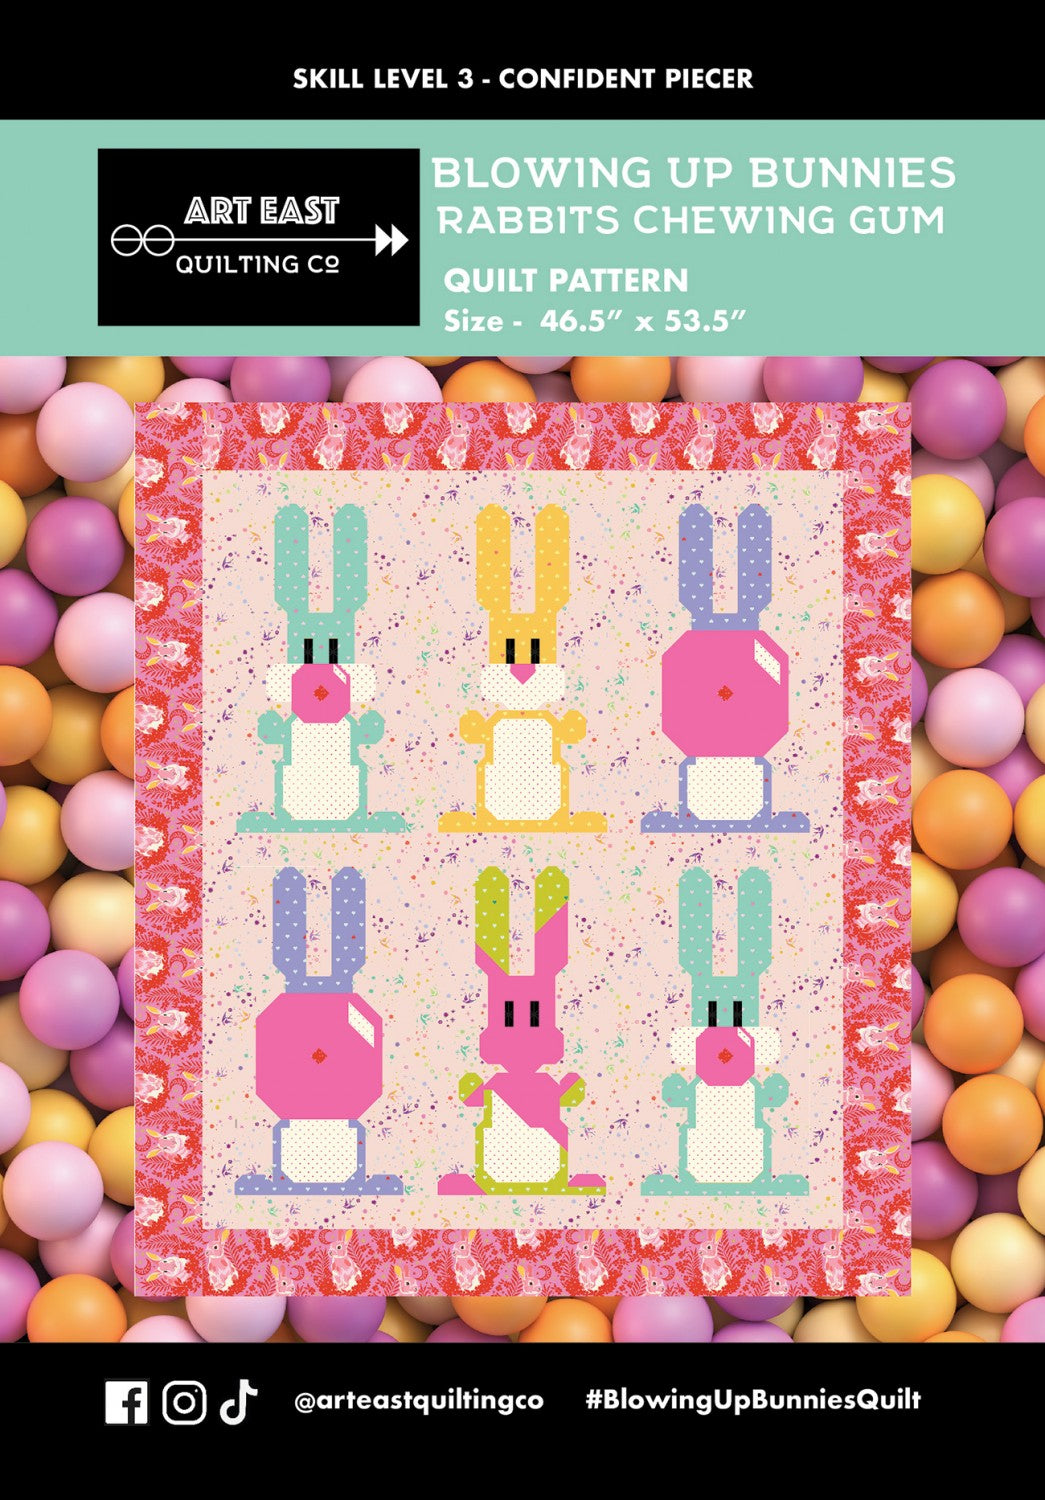 Blowing Up Bunnies - Rabbits Chewing Gum - Art East Quilt Co